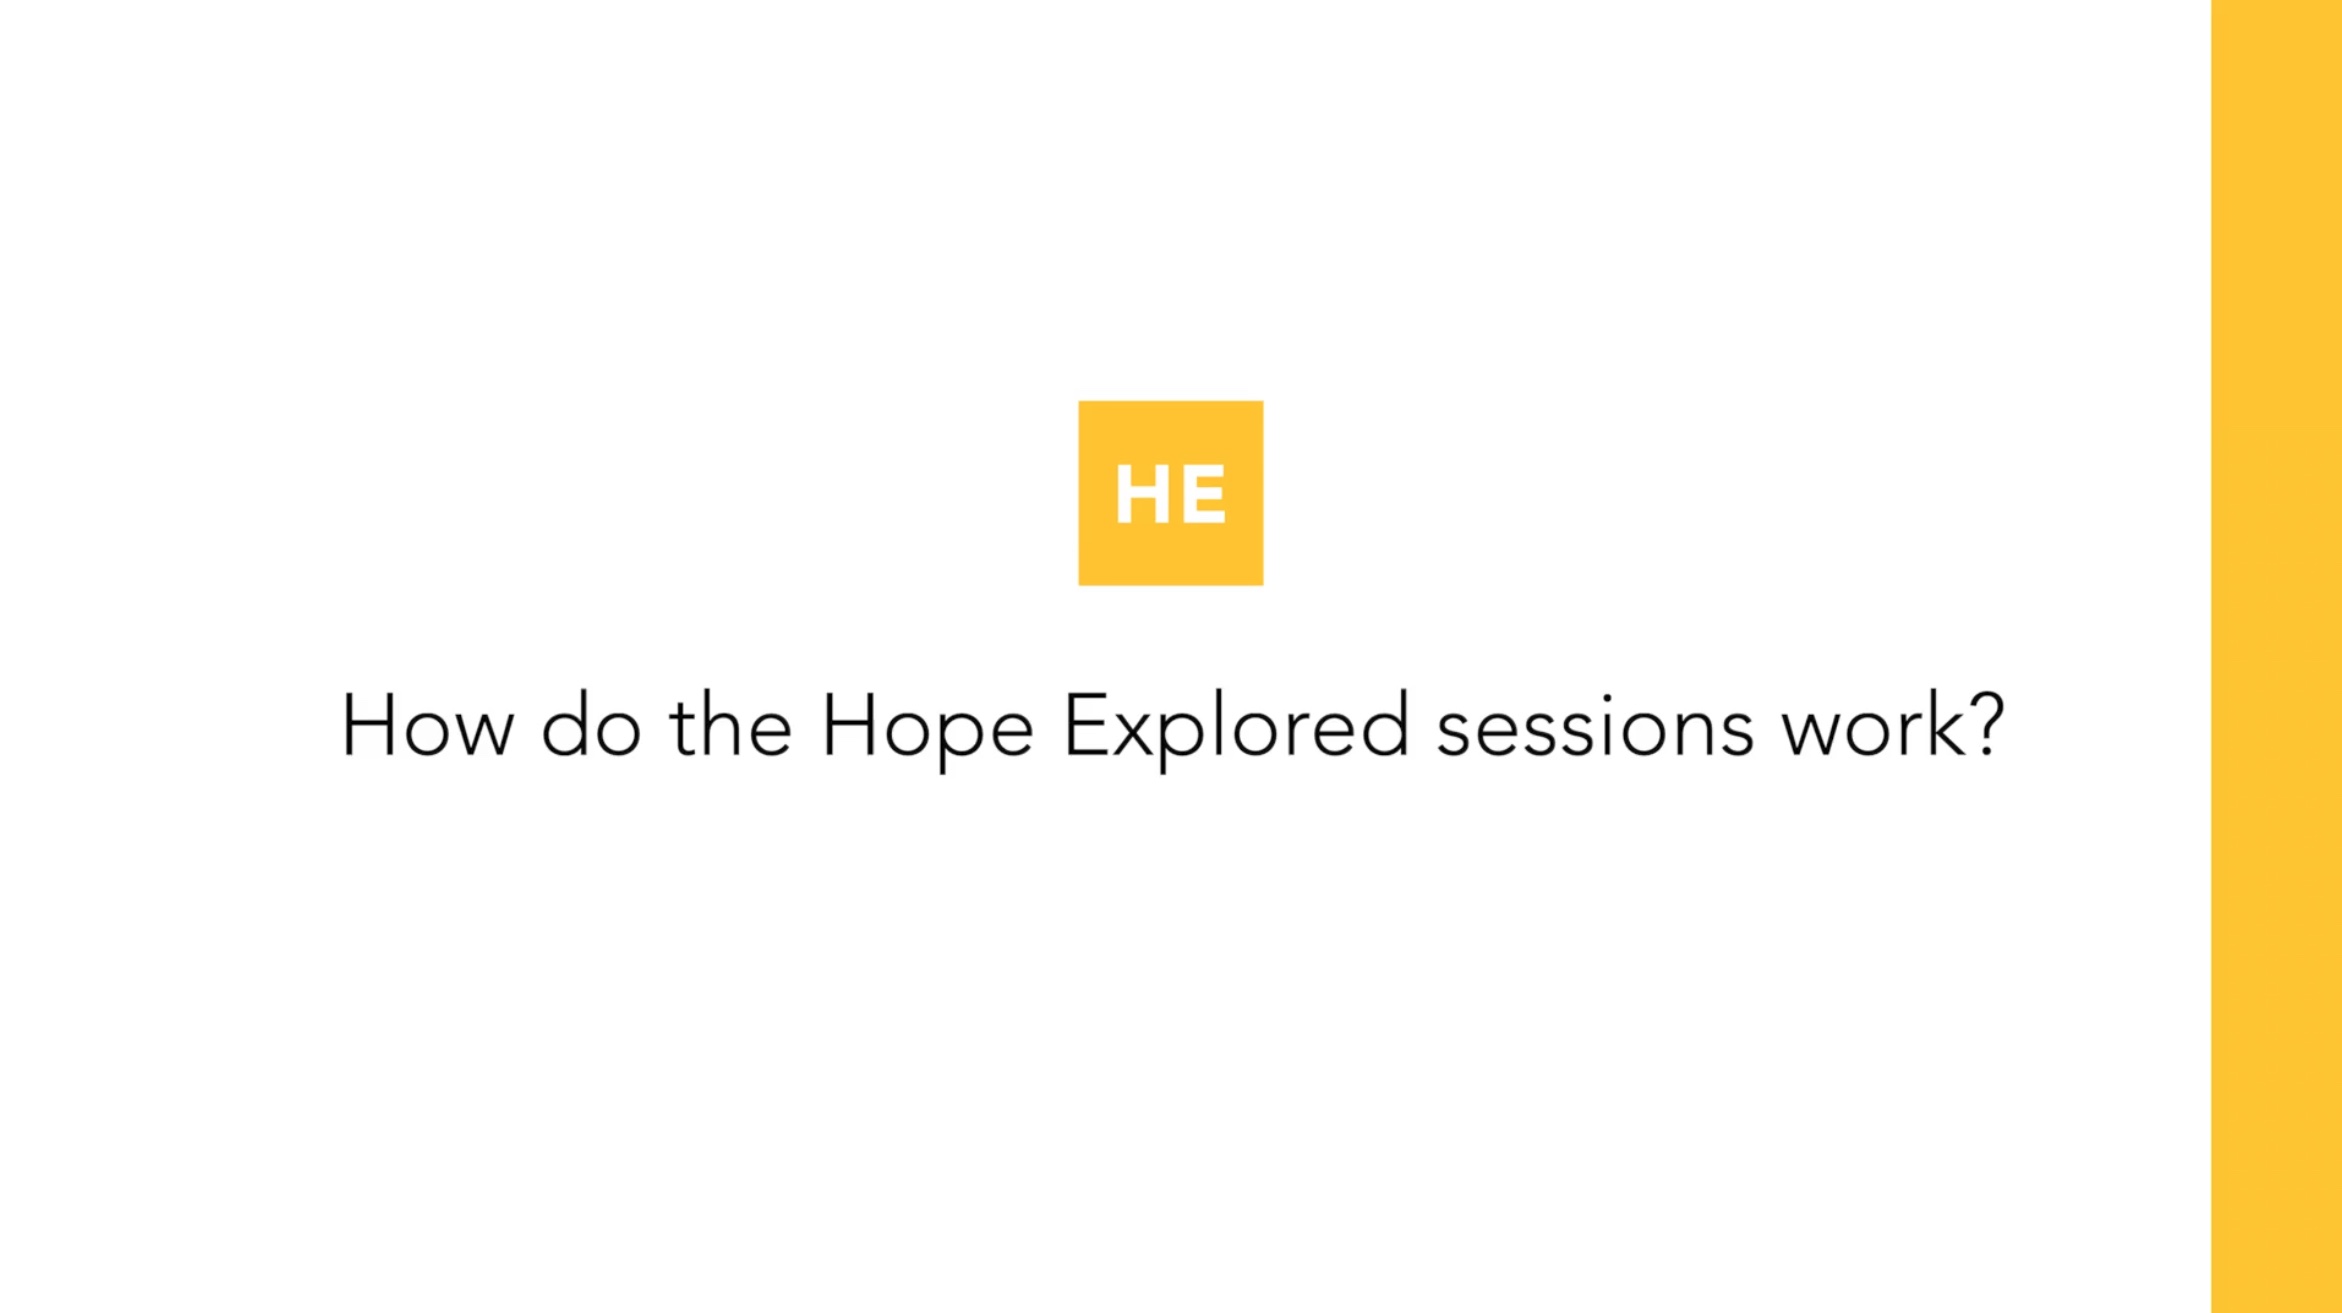 How do the Hope Explored sessions work?